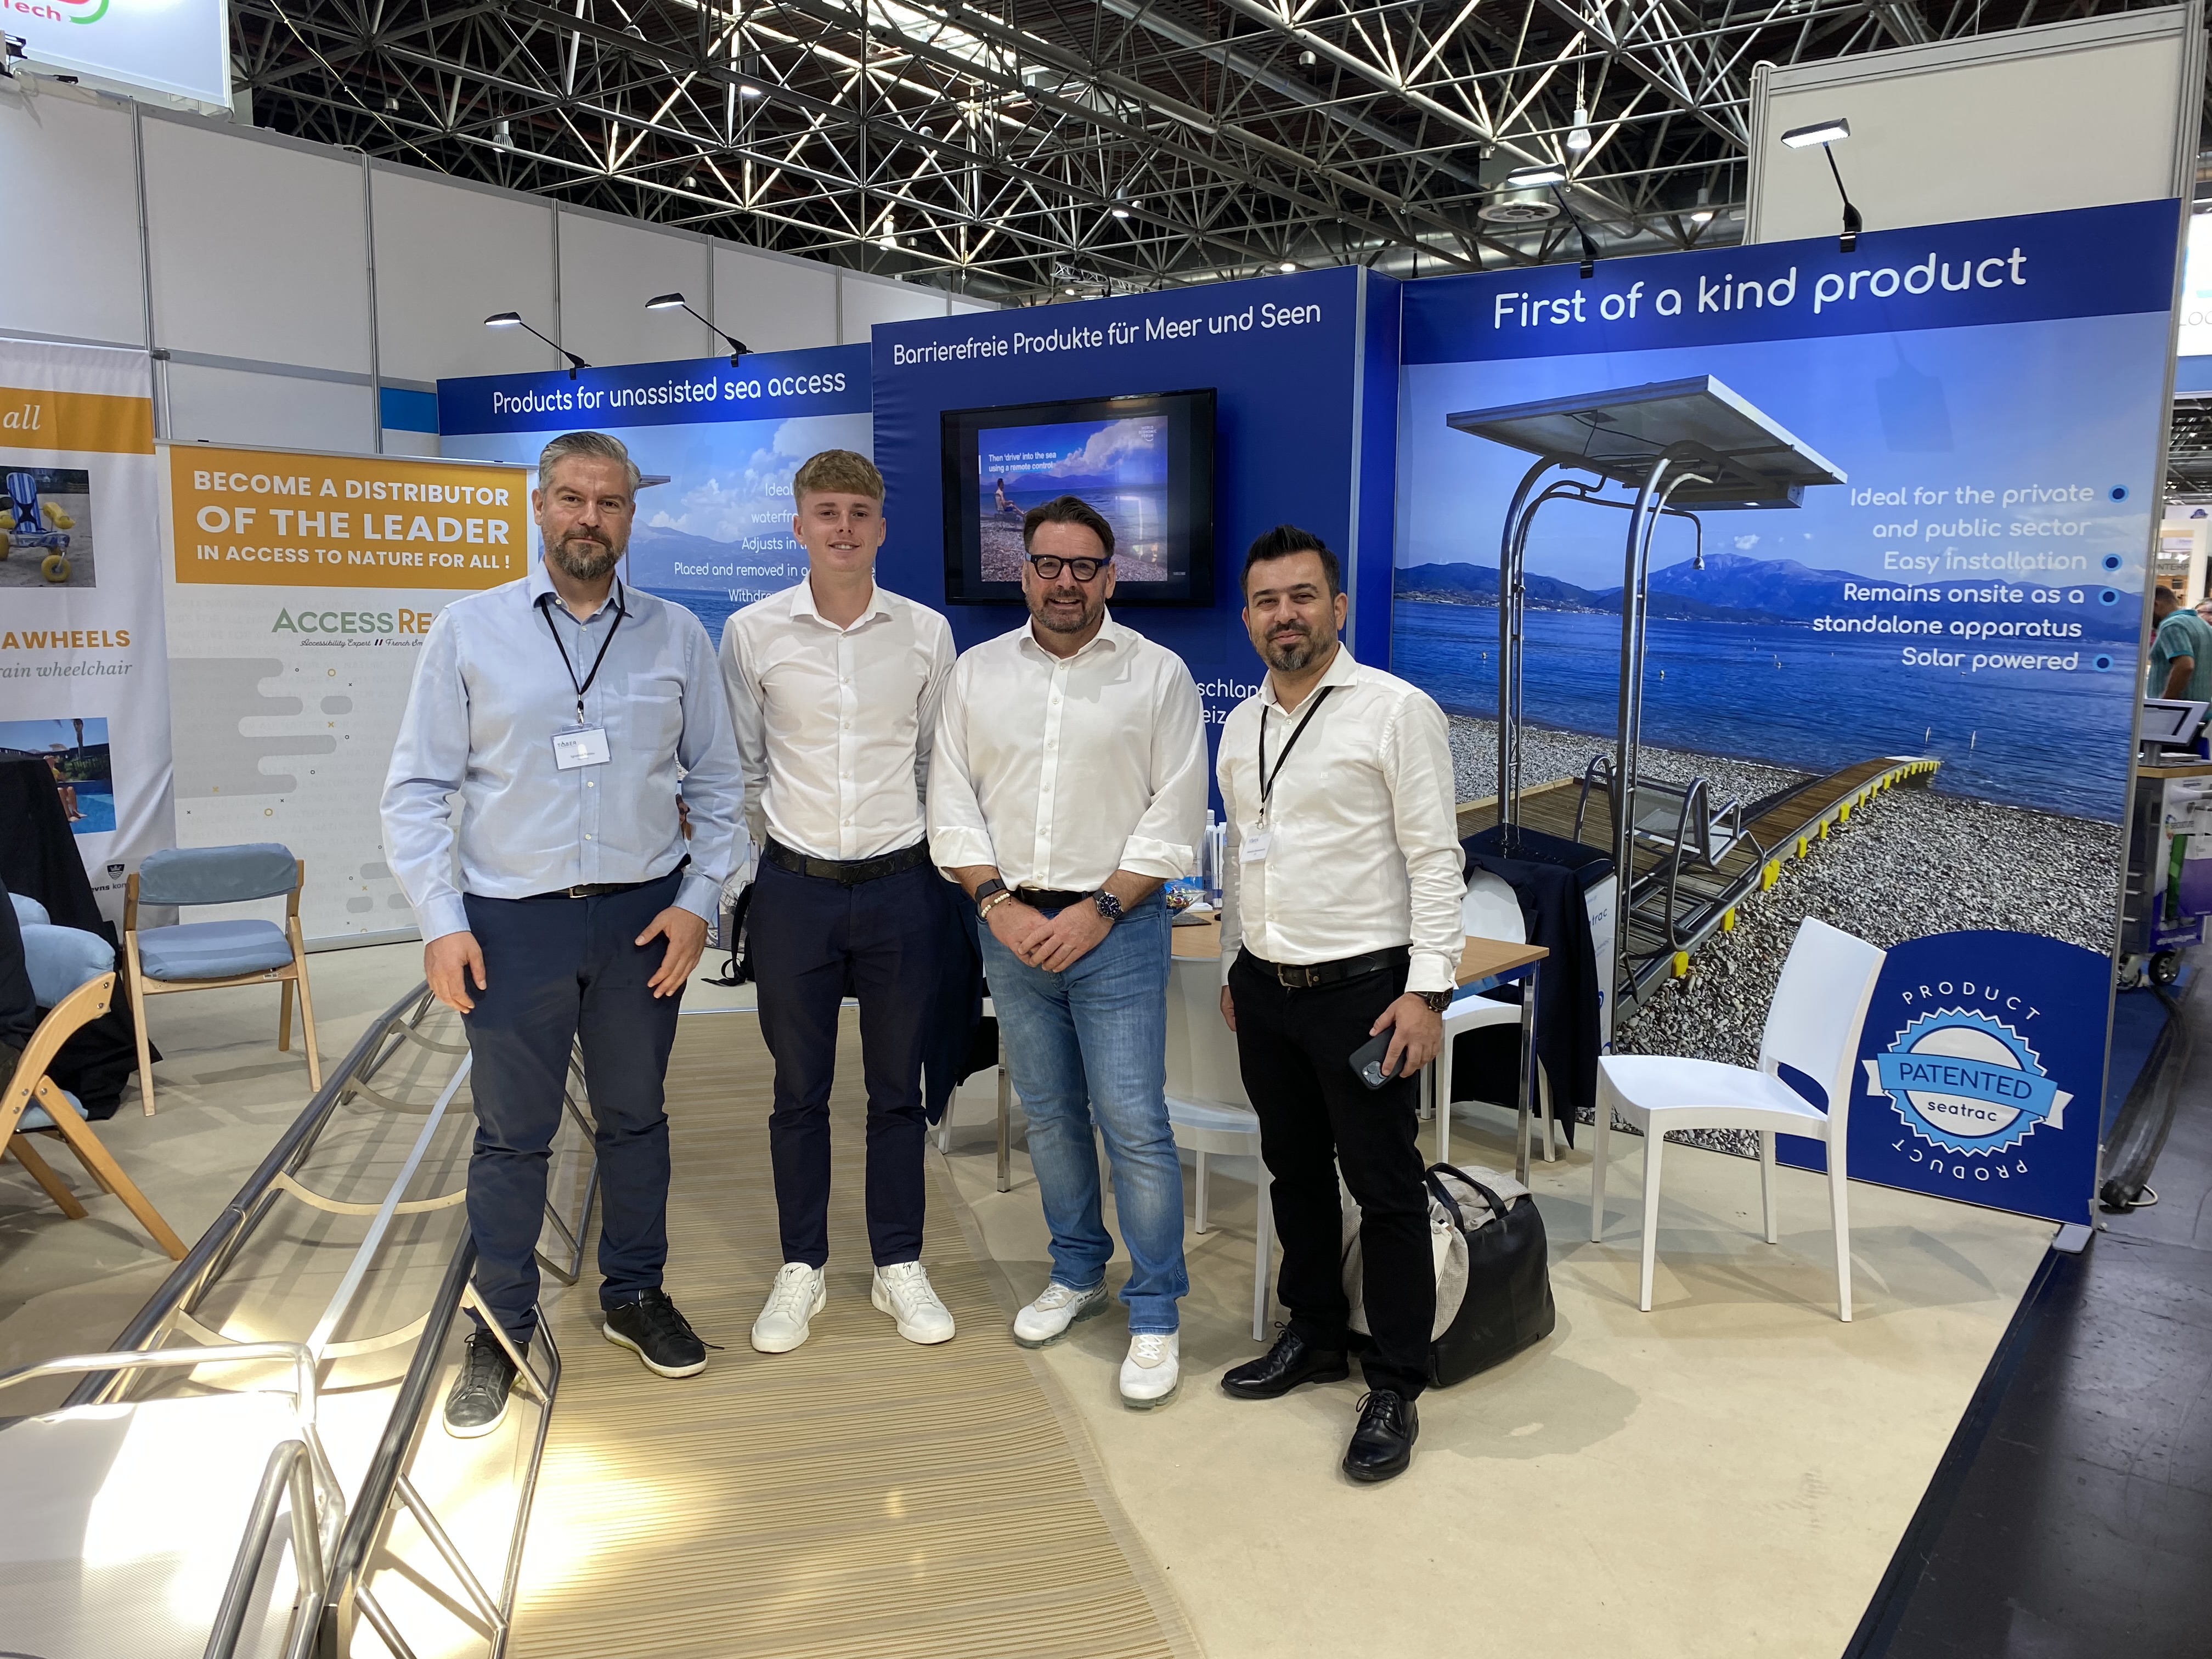 The distributor in the UK, Pool Lift visited the booth.